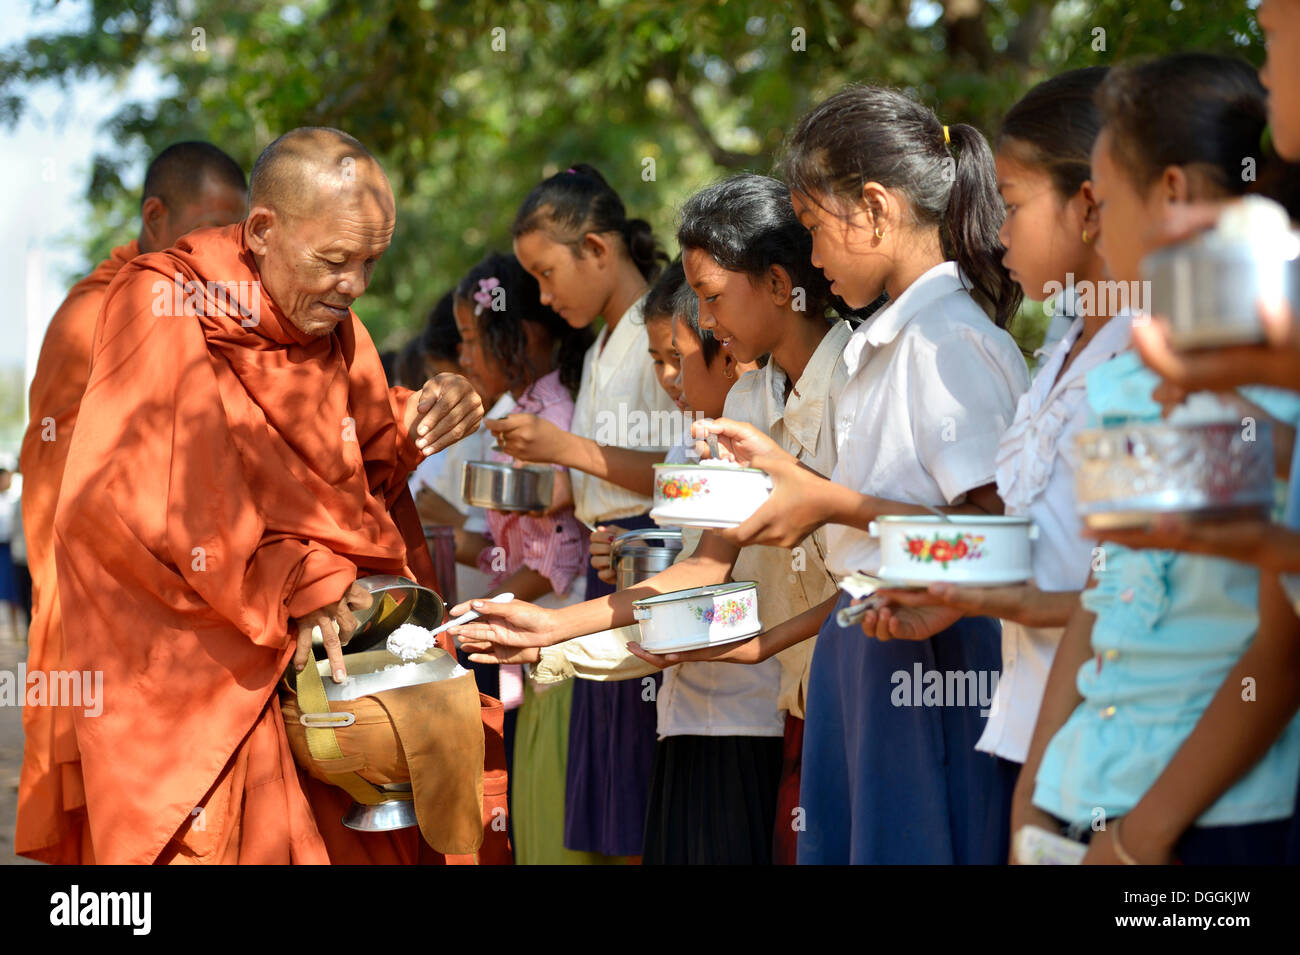 Children donating food and money to a Buddhist monk, traditional ceremony as part of the celebration of the Cambodian New Year Stock Photo